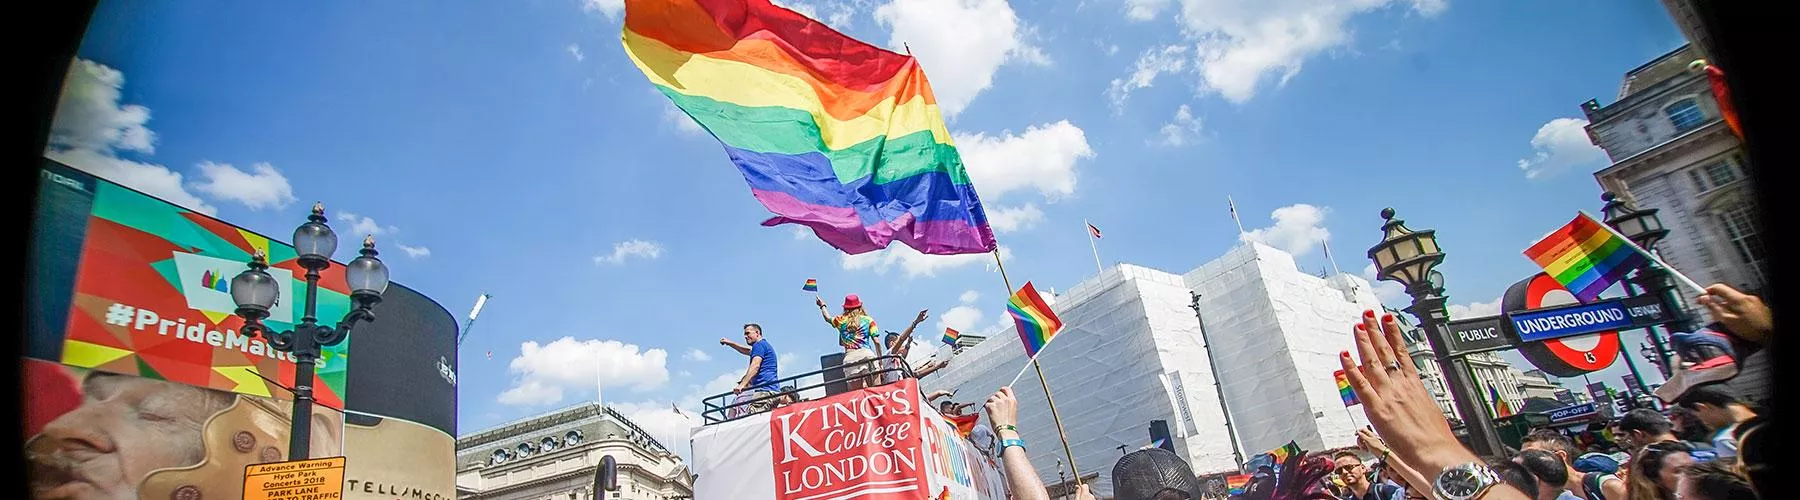 The King's logo on a pride bus, with a giant rainbow flag flying above